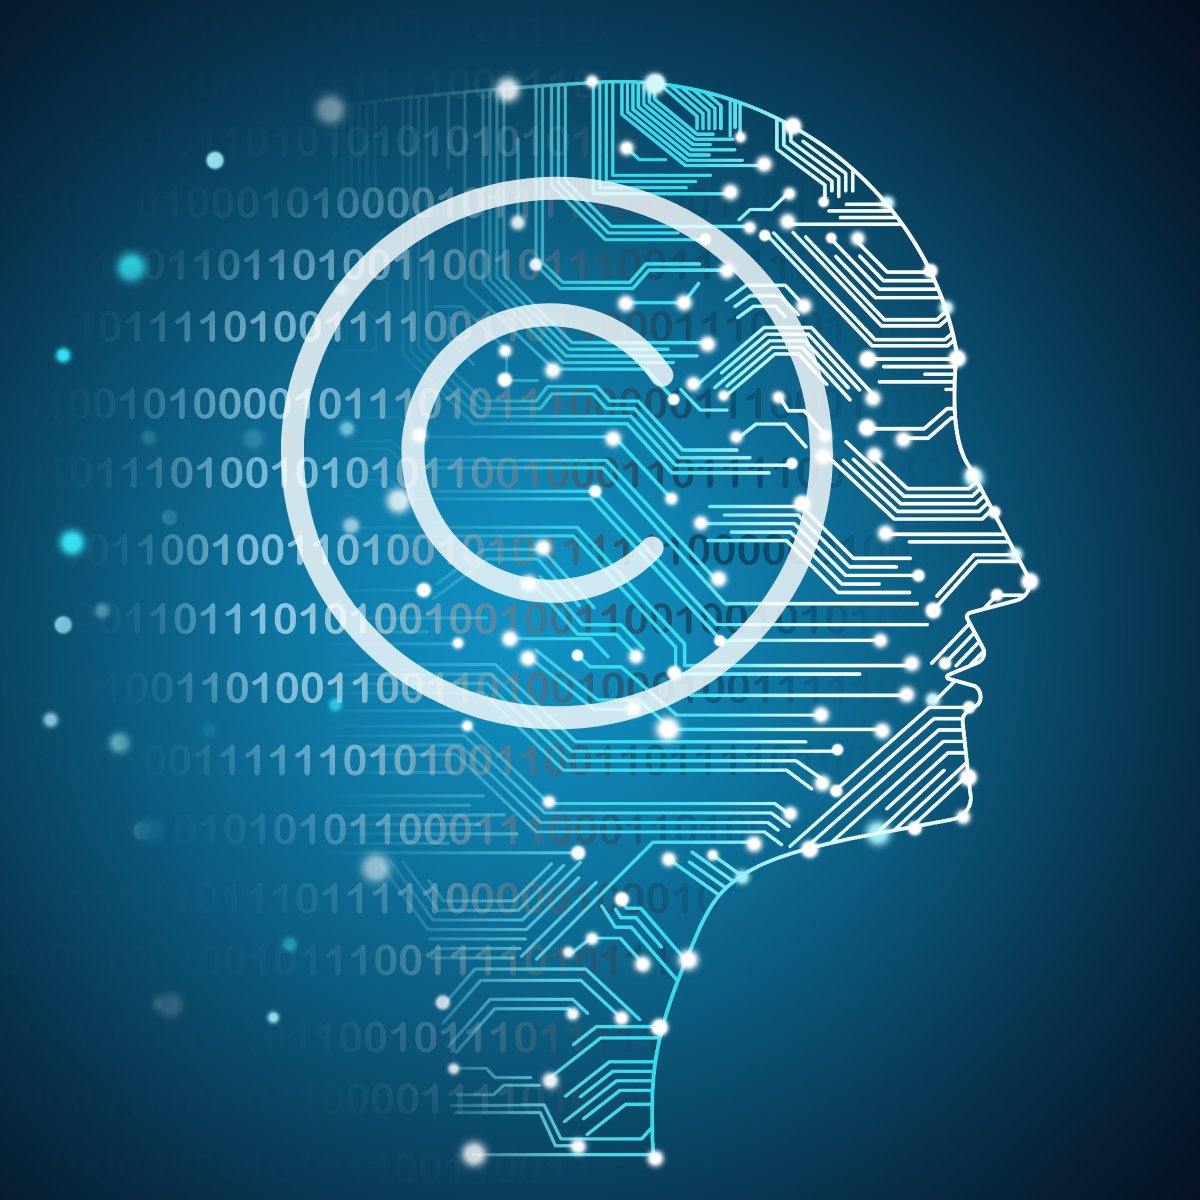 Are you interested in the legal issues around AI? LIBER needs your help! Join LIBER's Copyright & Legal Matters Working Group to extend your knowledge about AI and much more, while supporting other librarians. ow.ly/mrPL50R1WBn